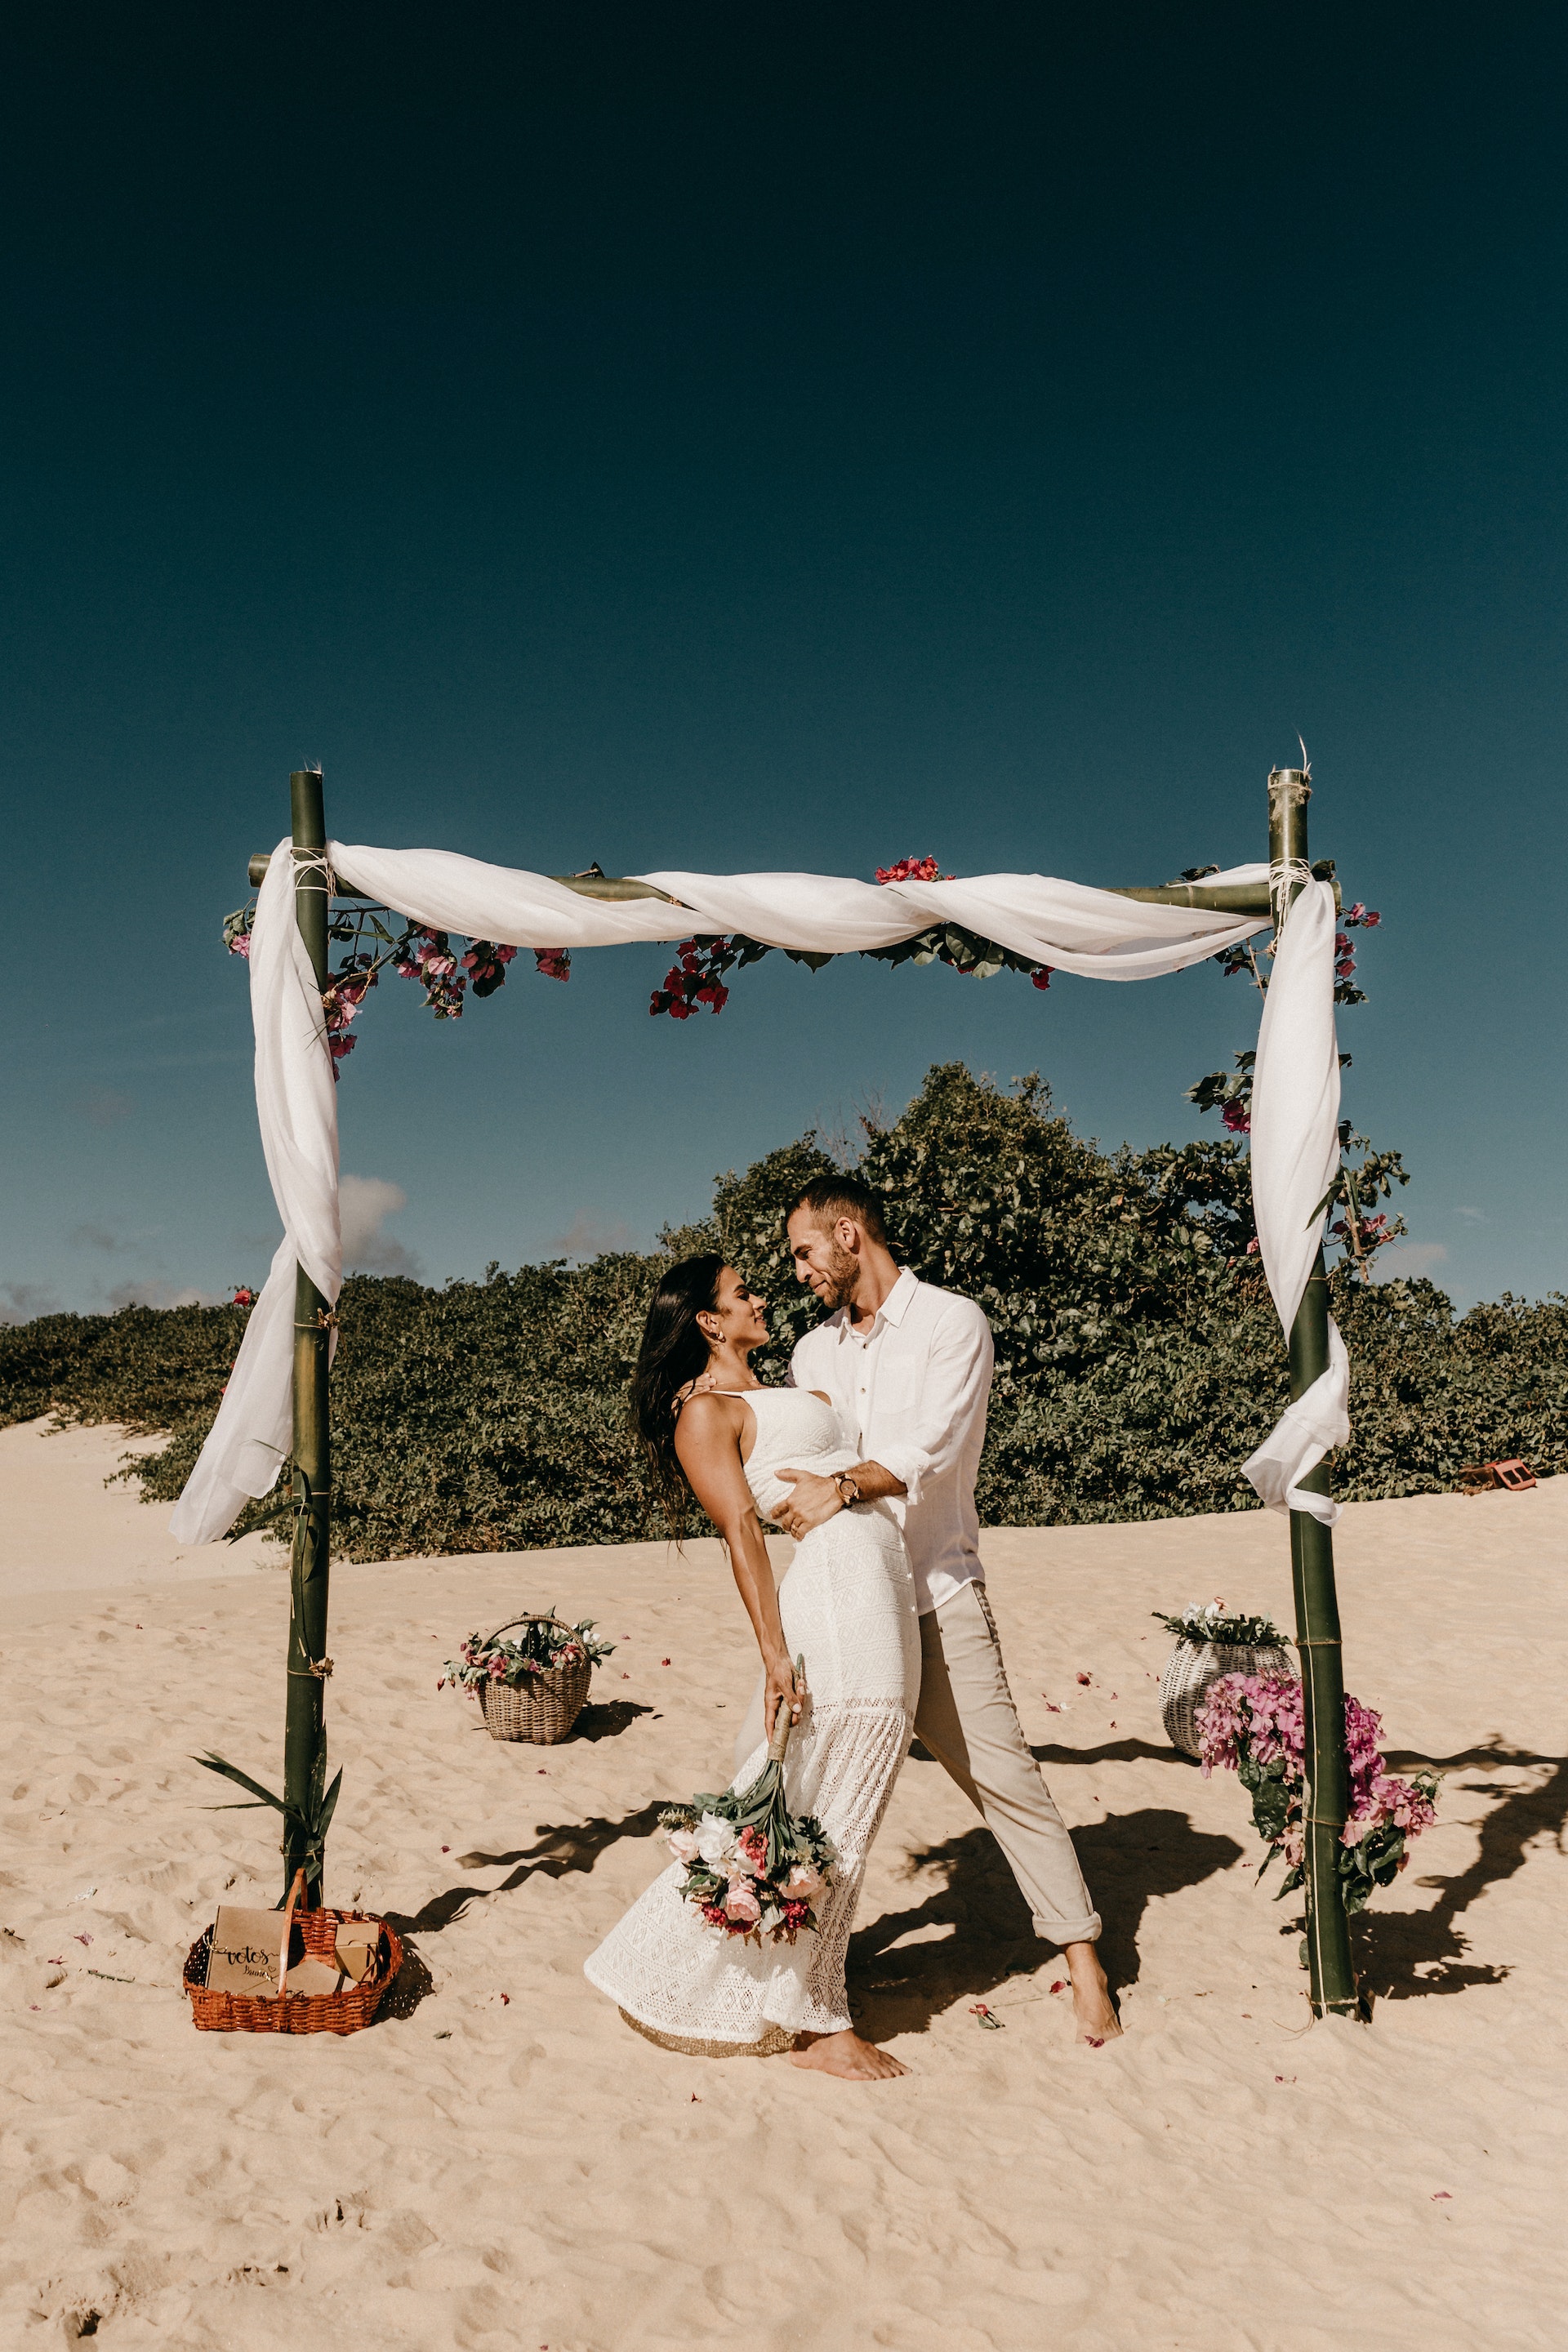 A bride and groom at a beach | Source: Pexels